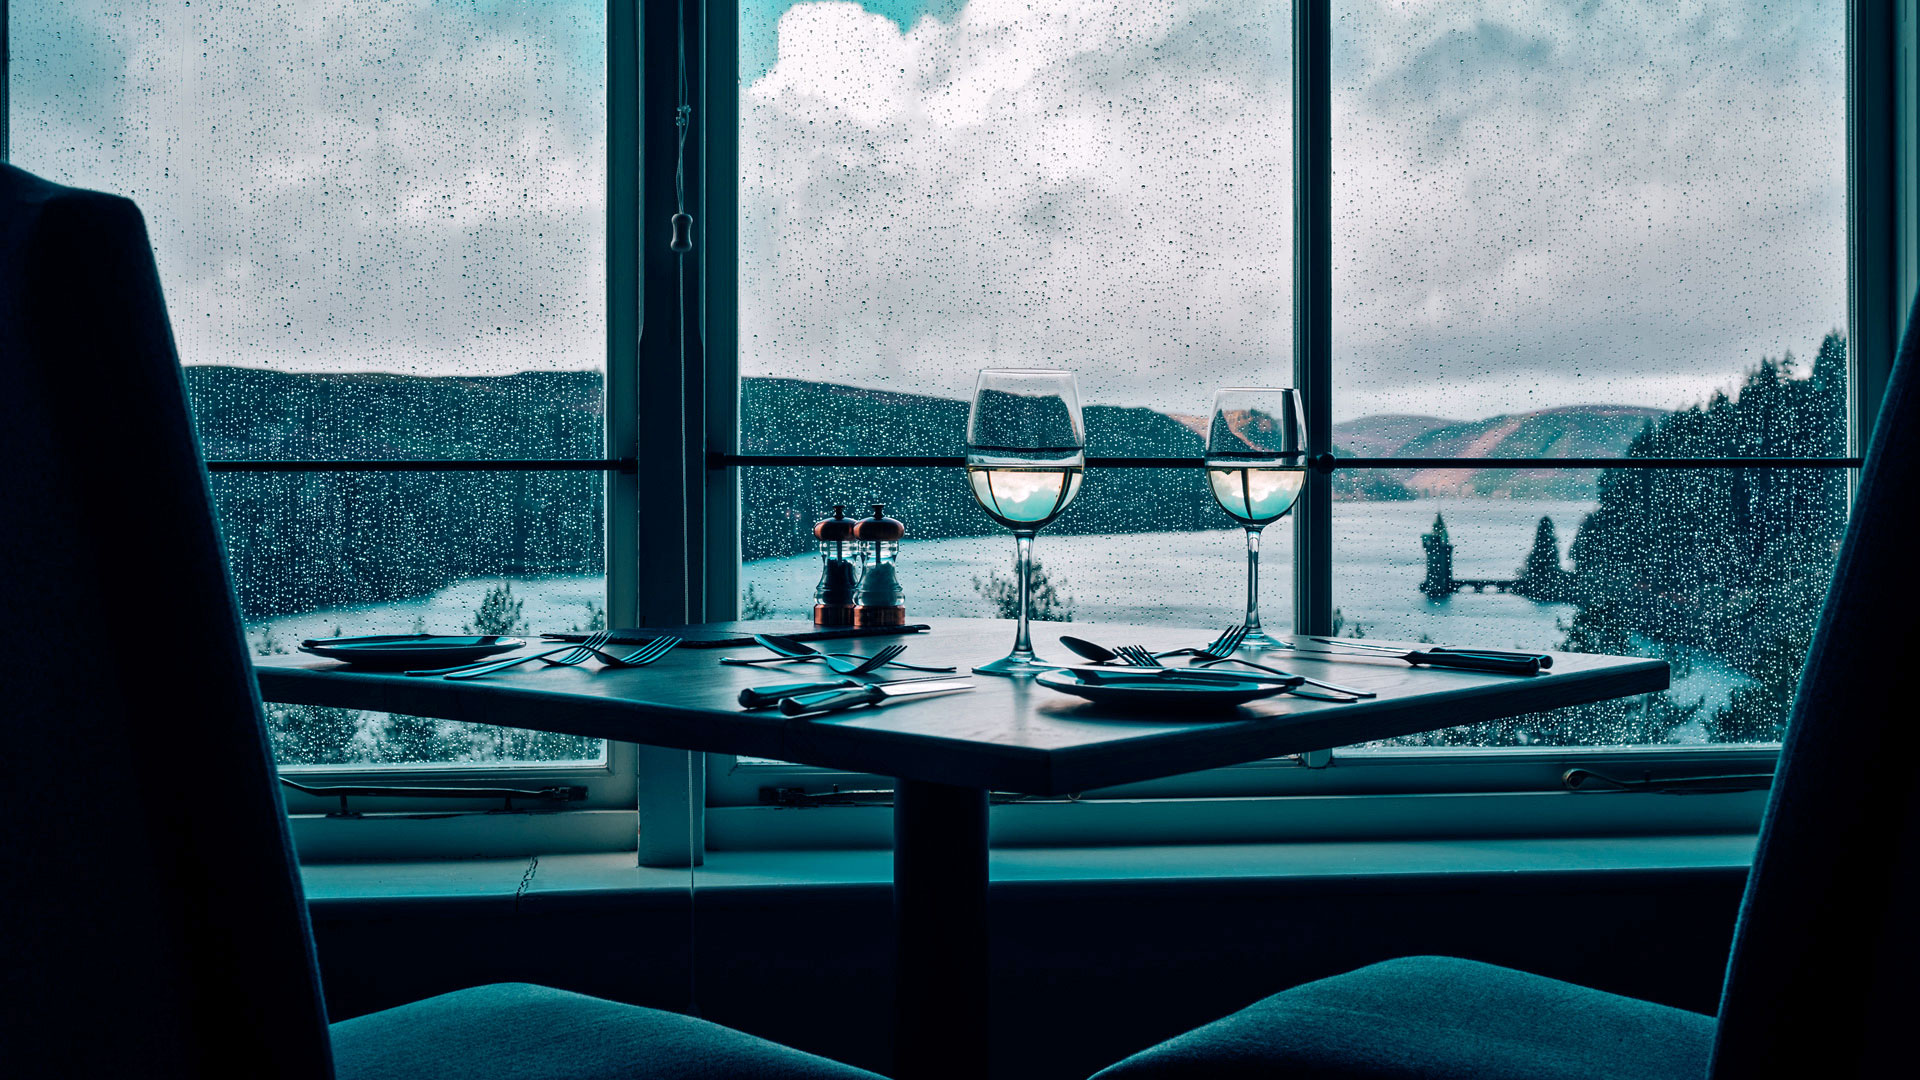 Fine dining overlooking the lake - Lake Vyrnwy Hotel, Snowdonia